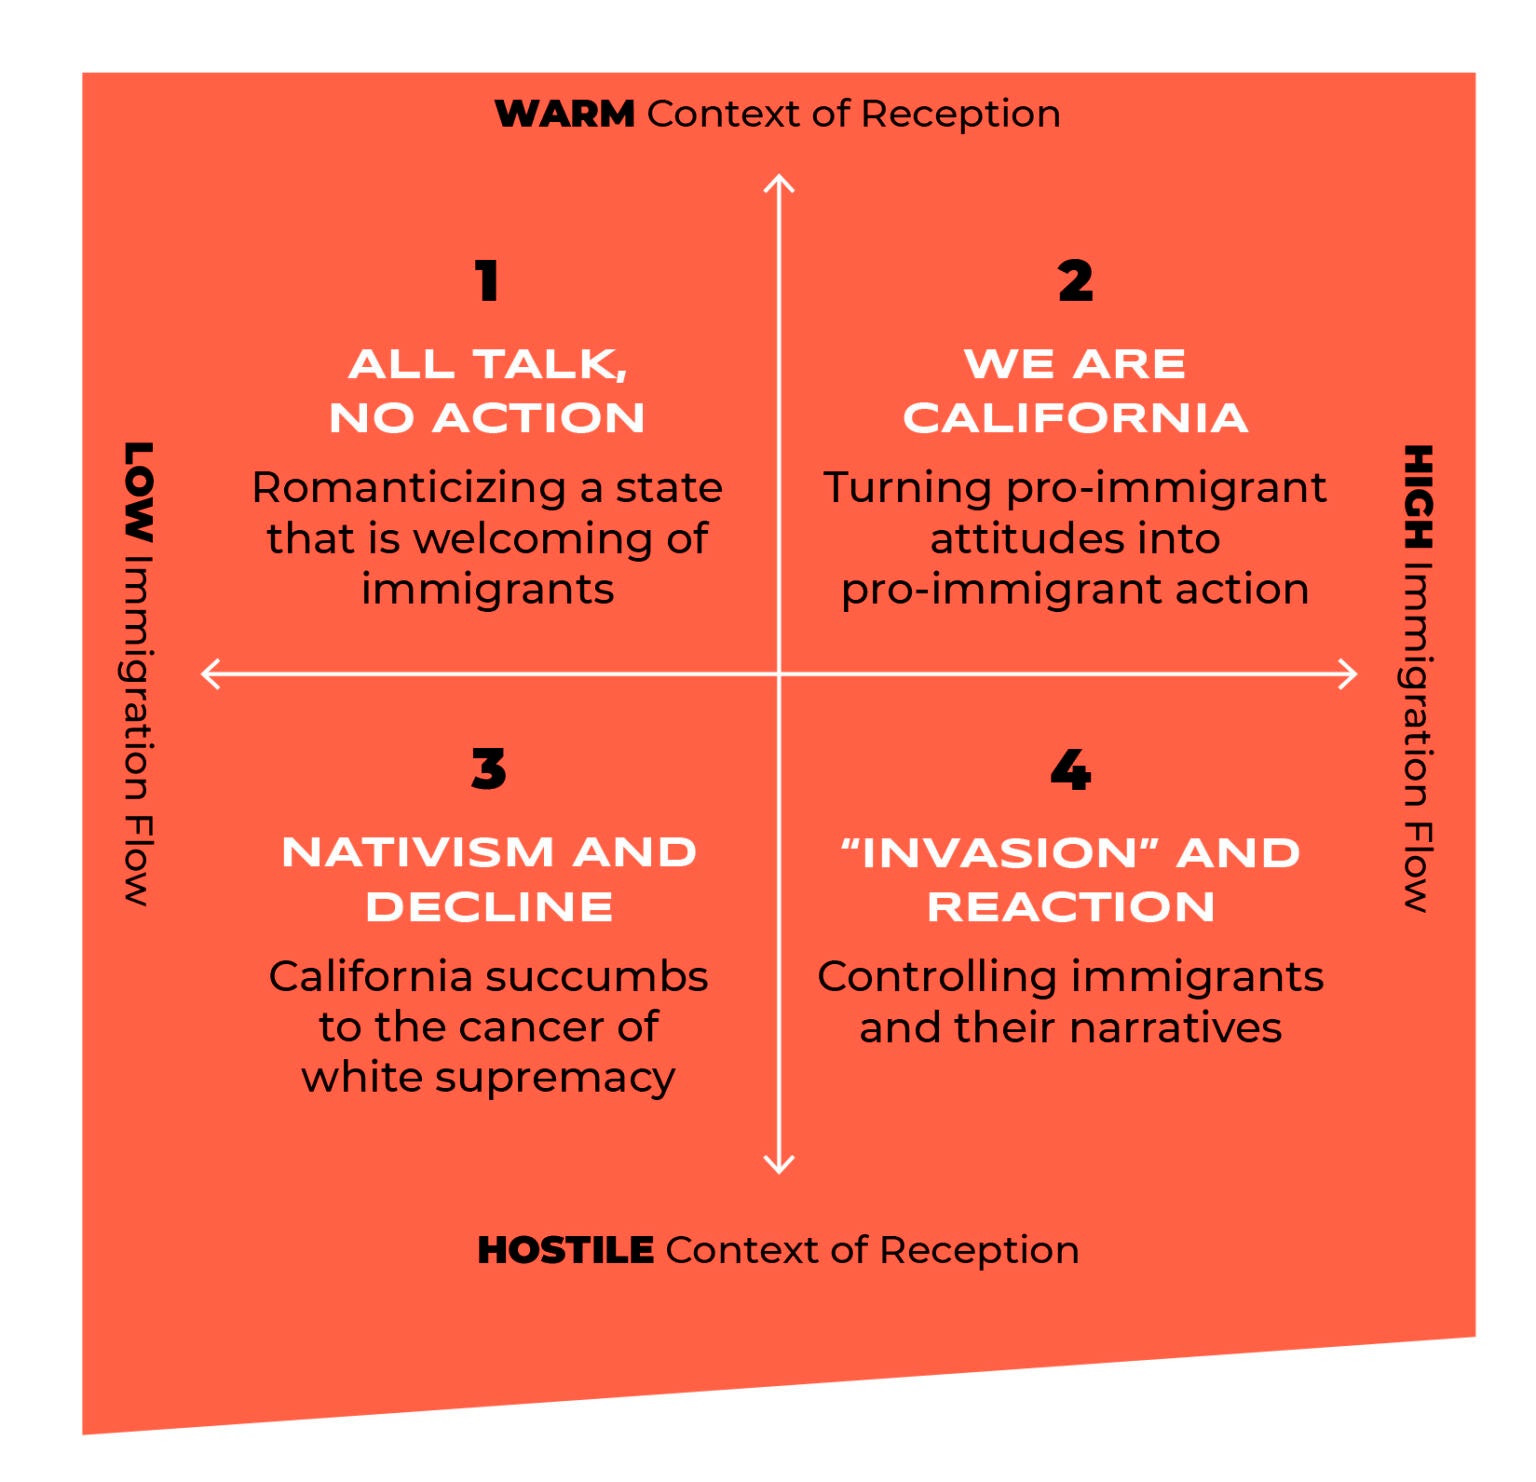 chart compass of warm to hostile context of reception and low to high immigration flow 